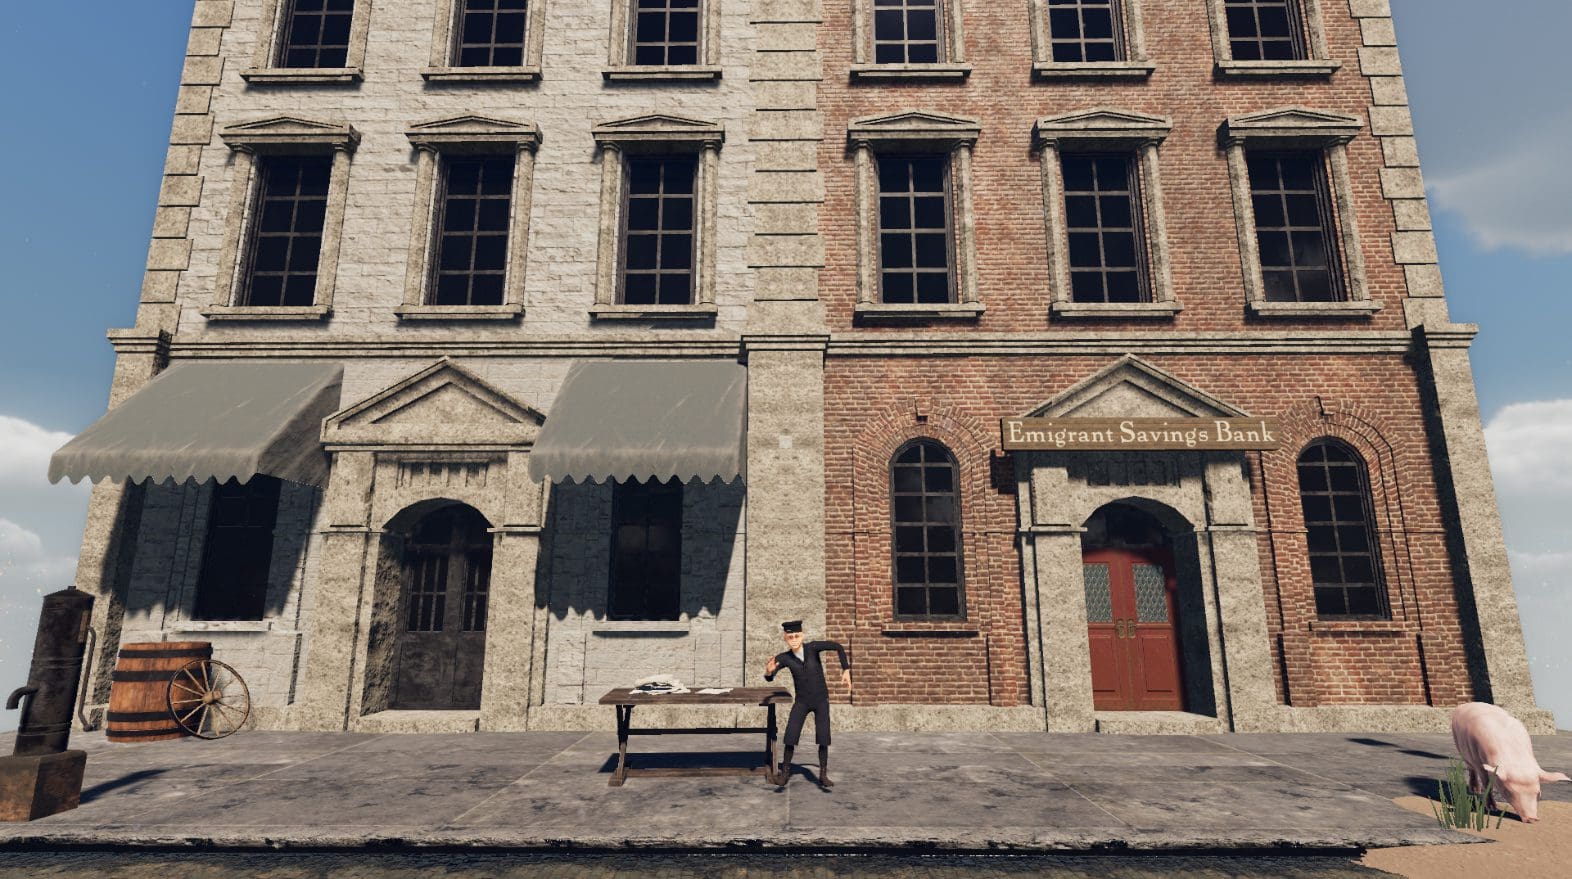 A man standing next to a bench in front of an old building.